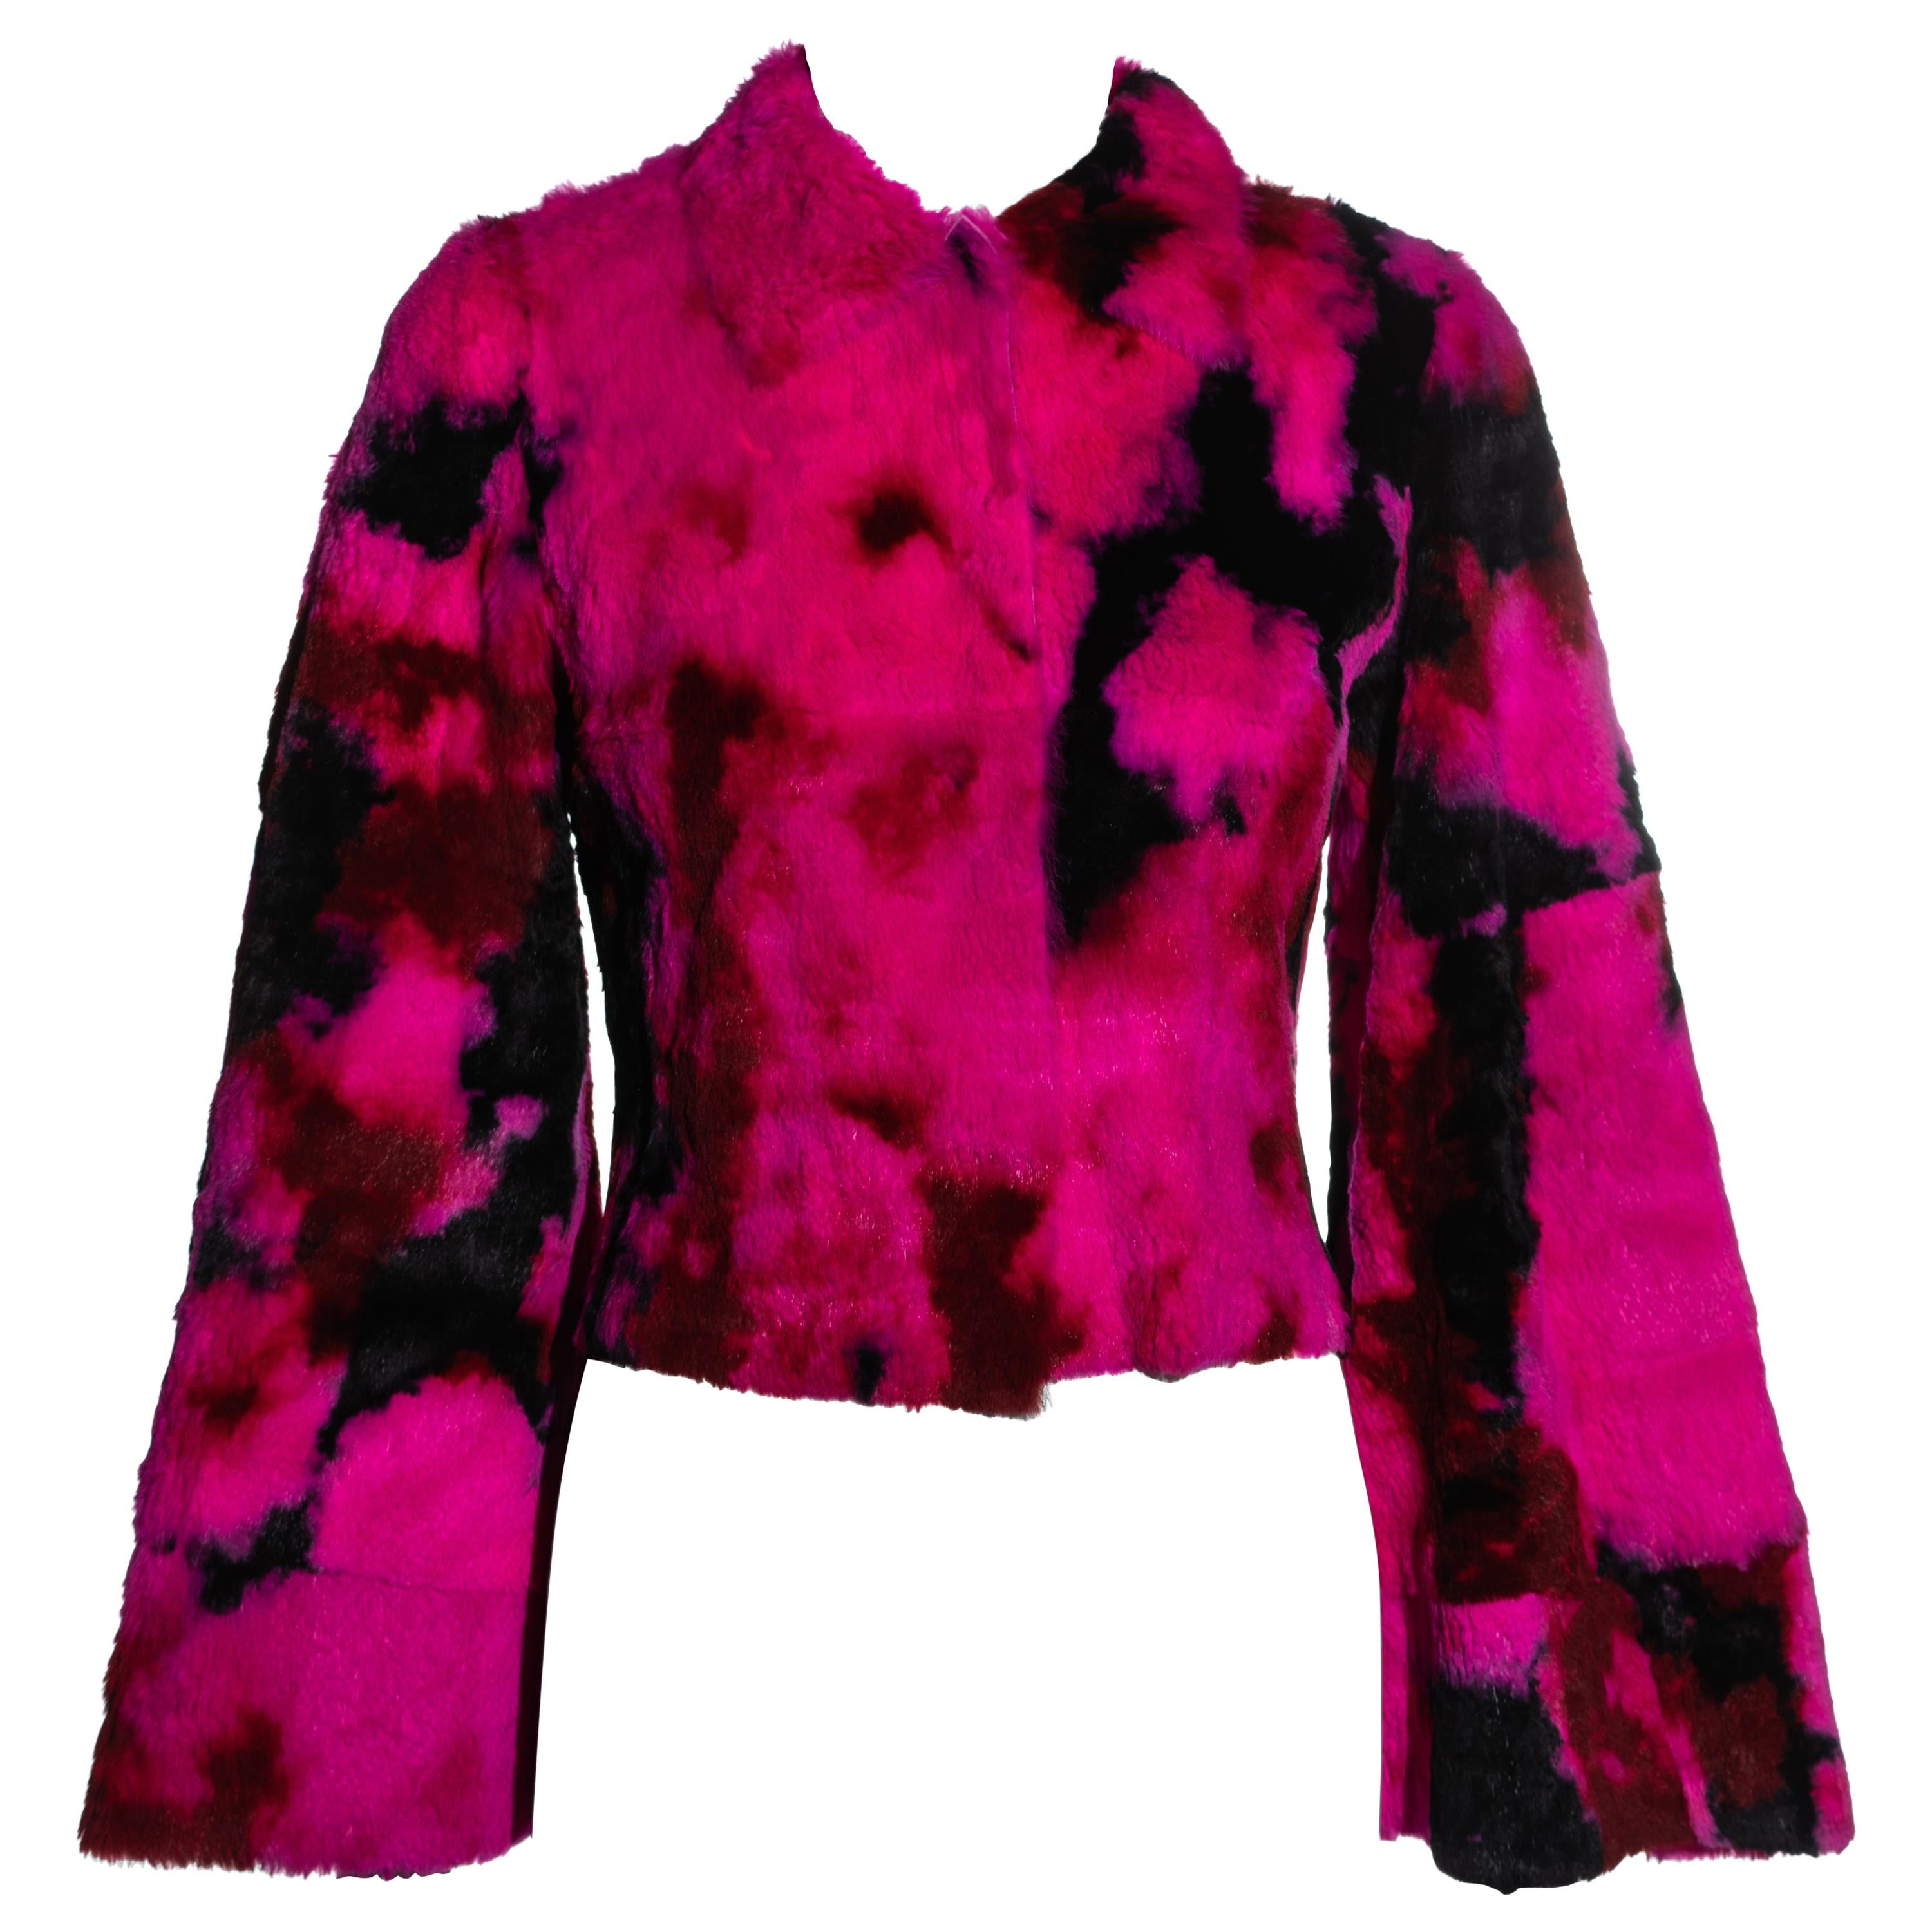 Dolce & Gabbana pink and black tie-dyed fur jacket, fw 1999